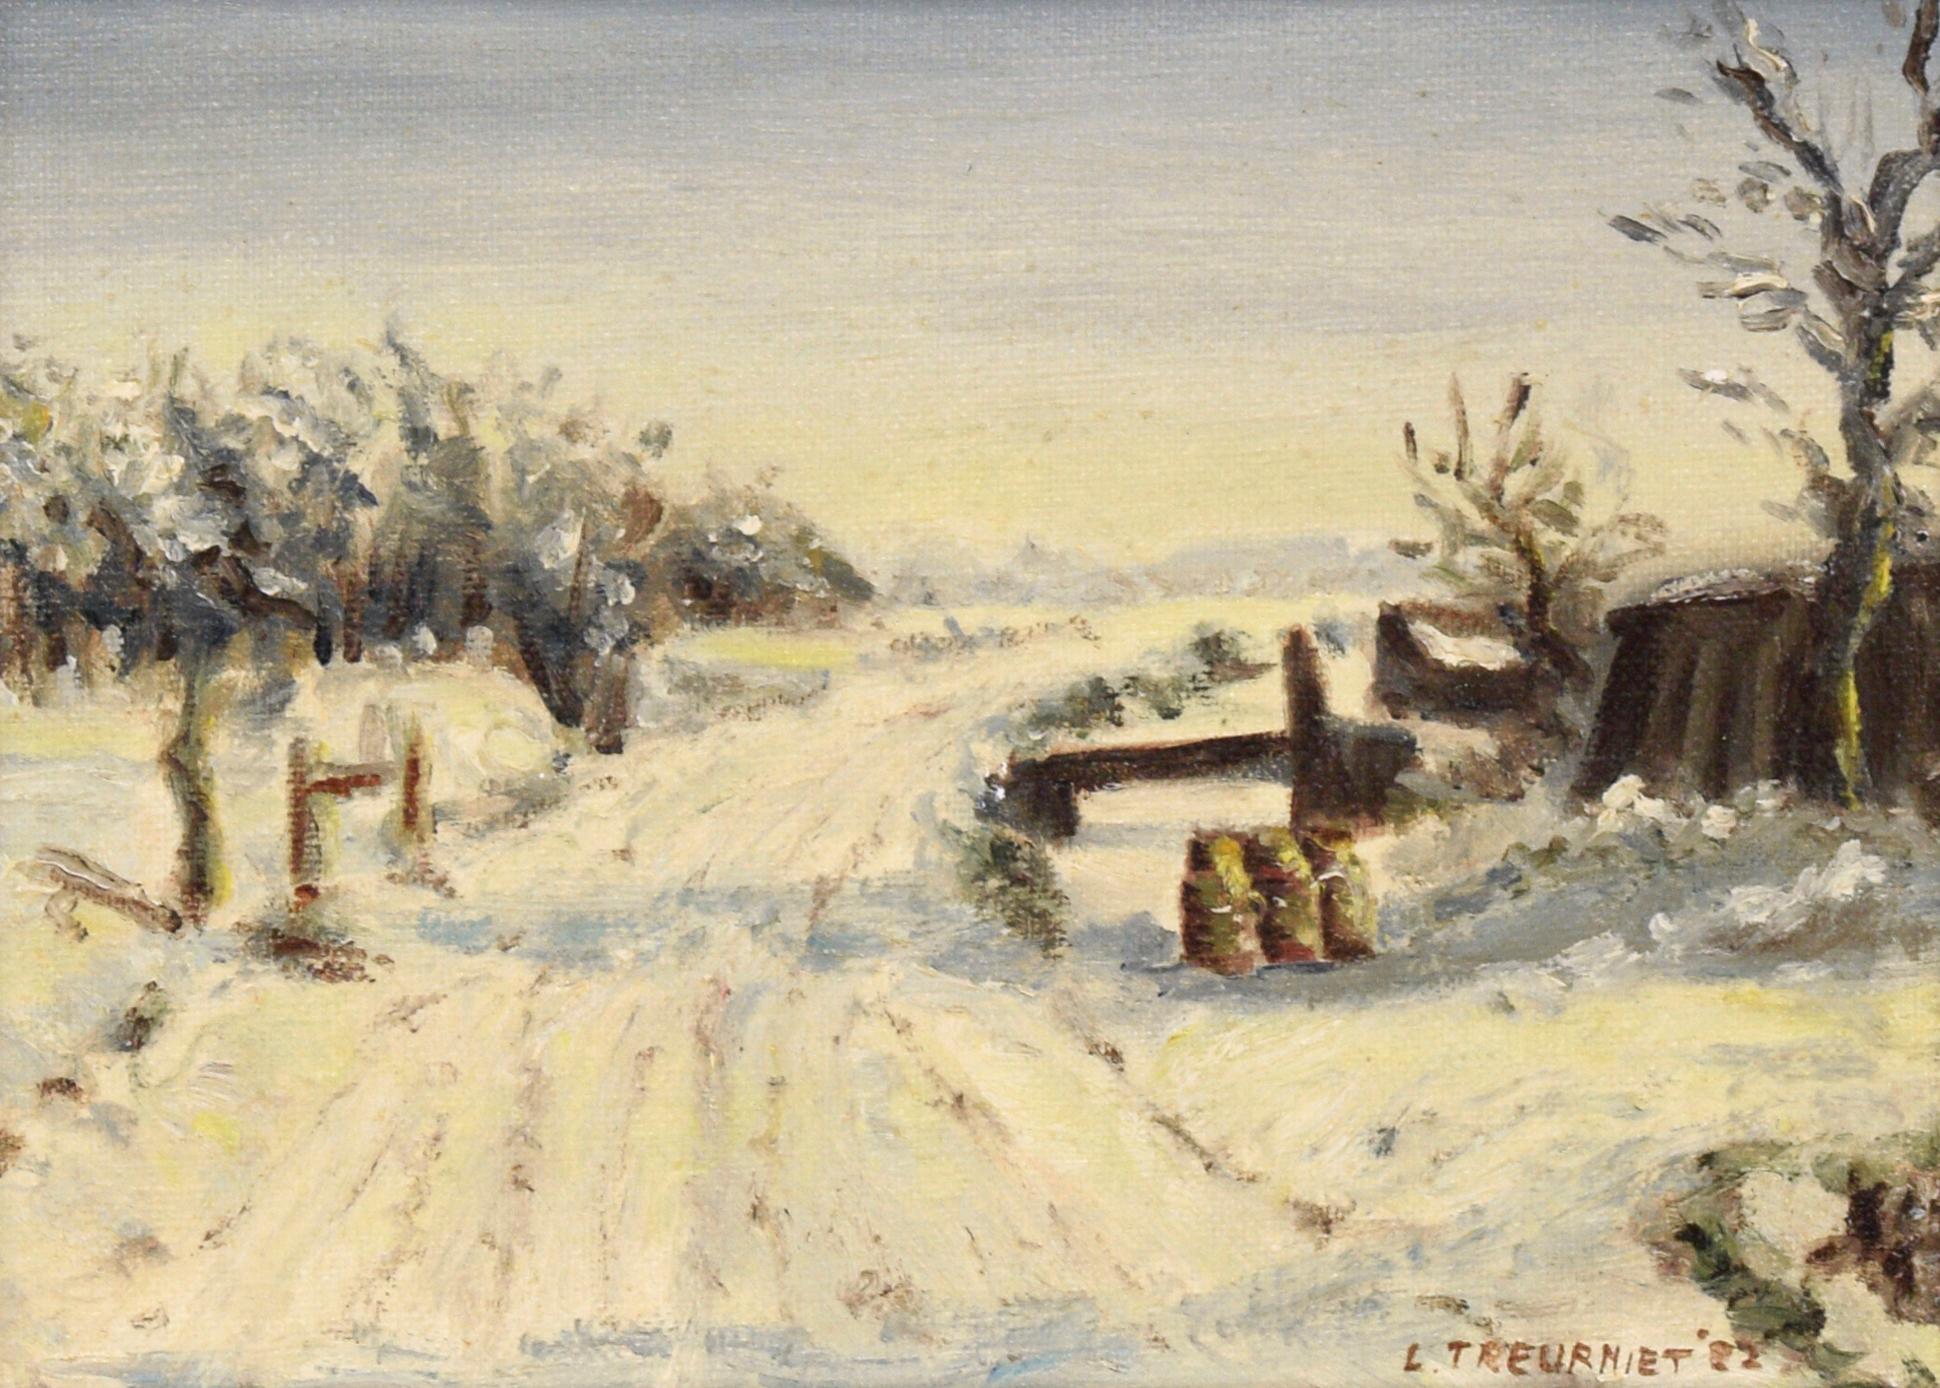 French Country Road in Winter - Landscape - Painting by L. Treurniet